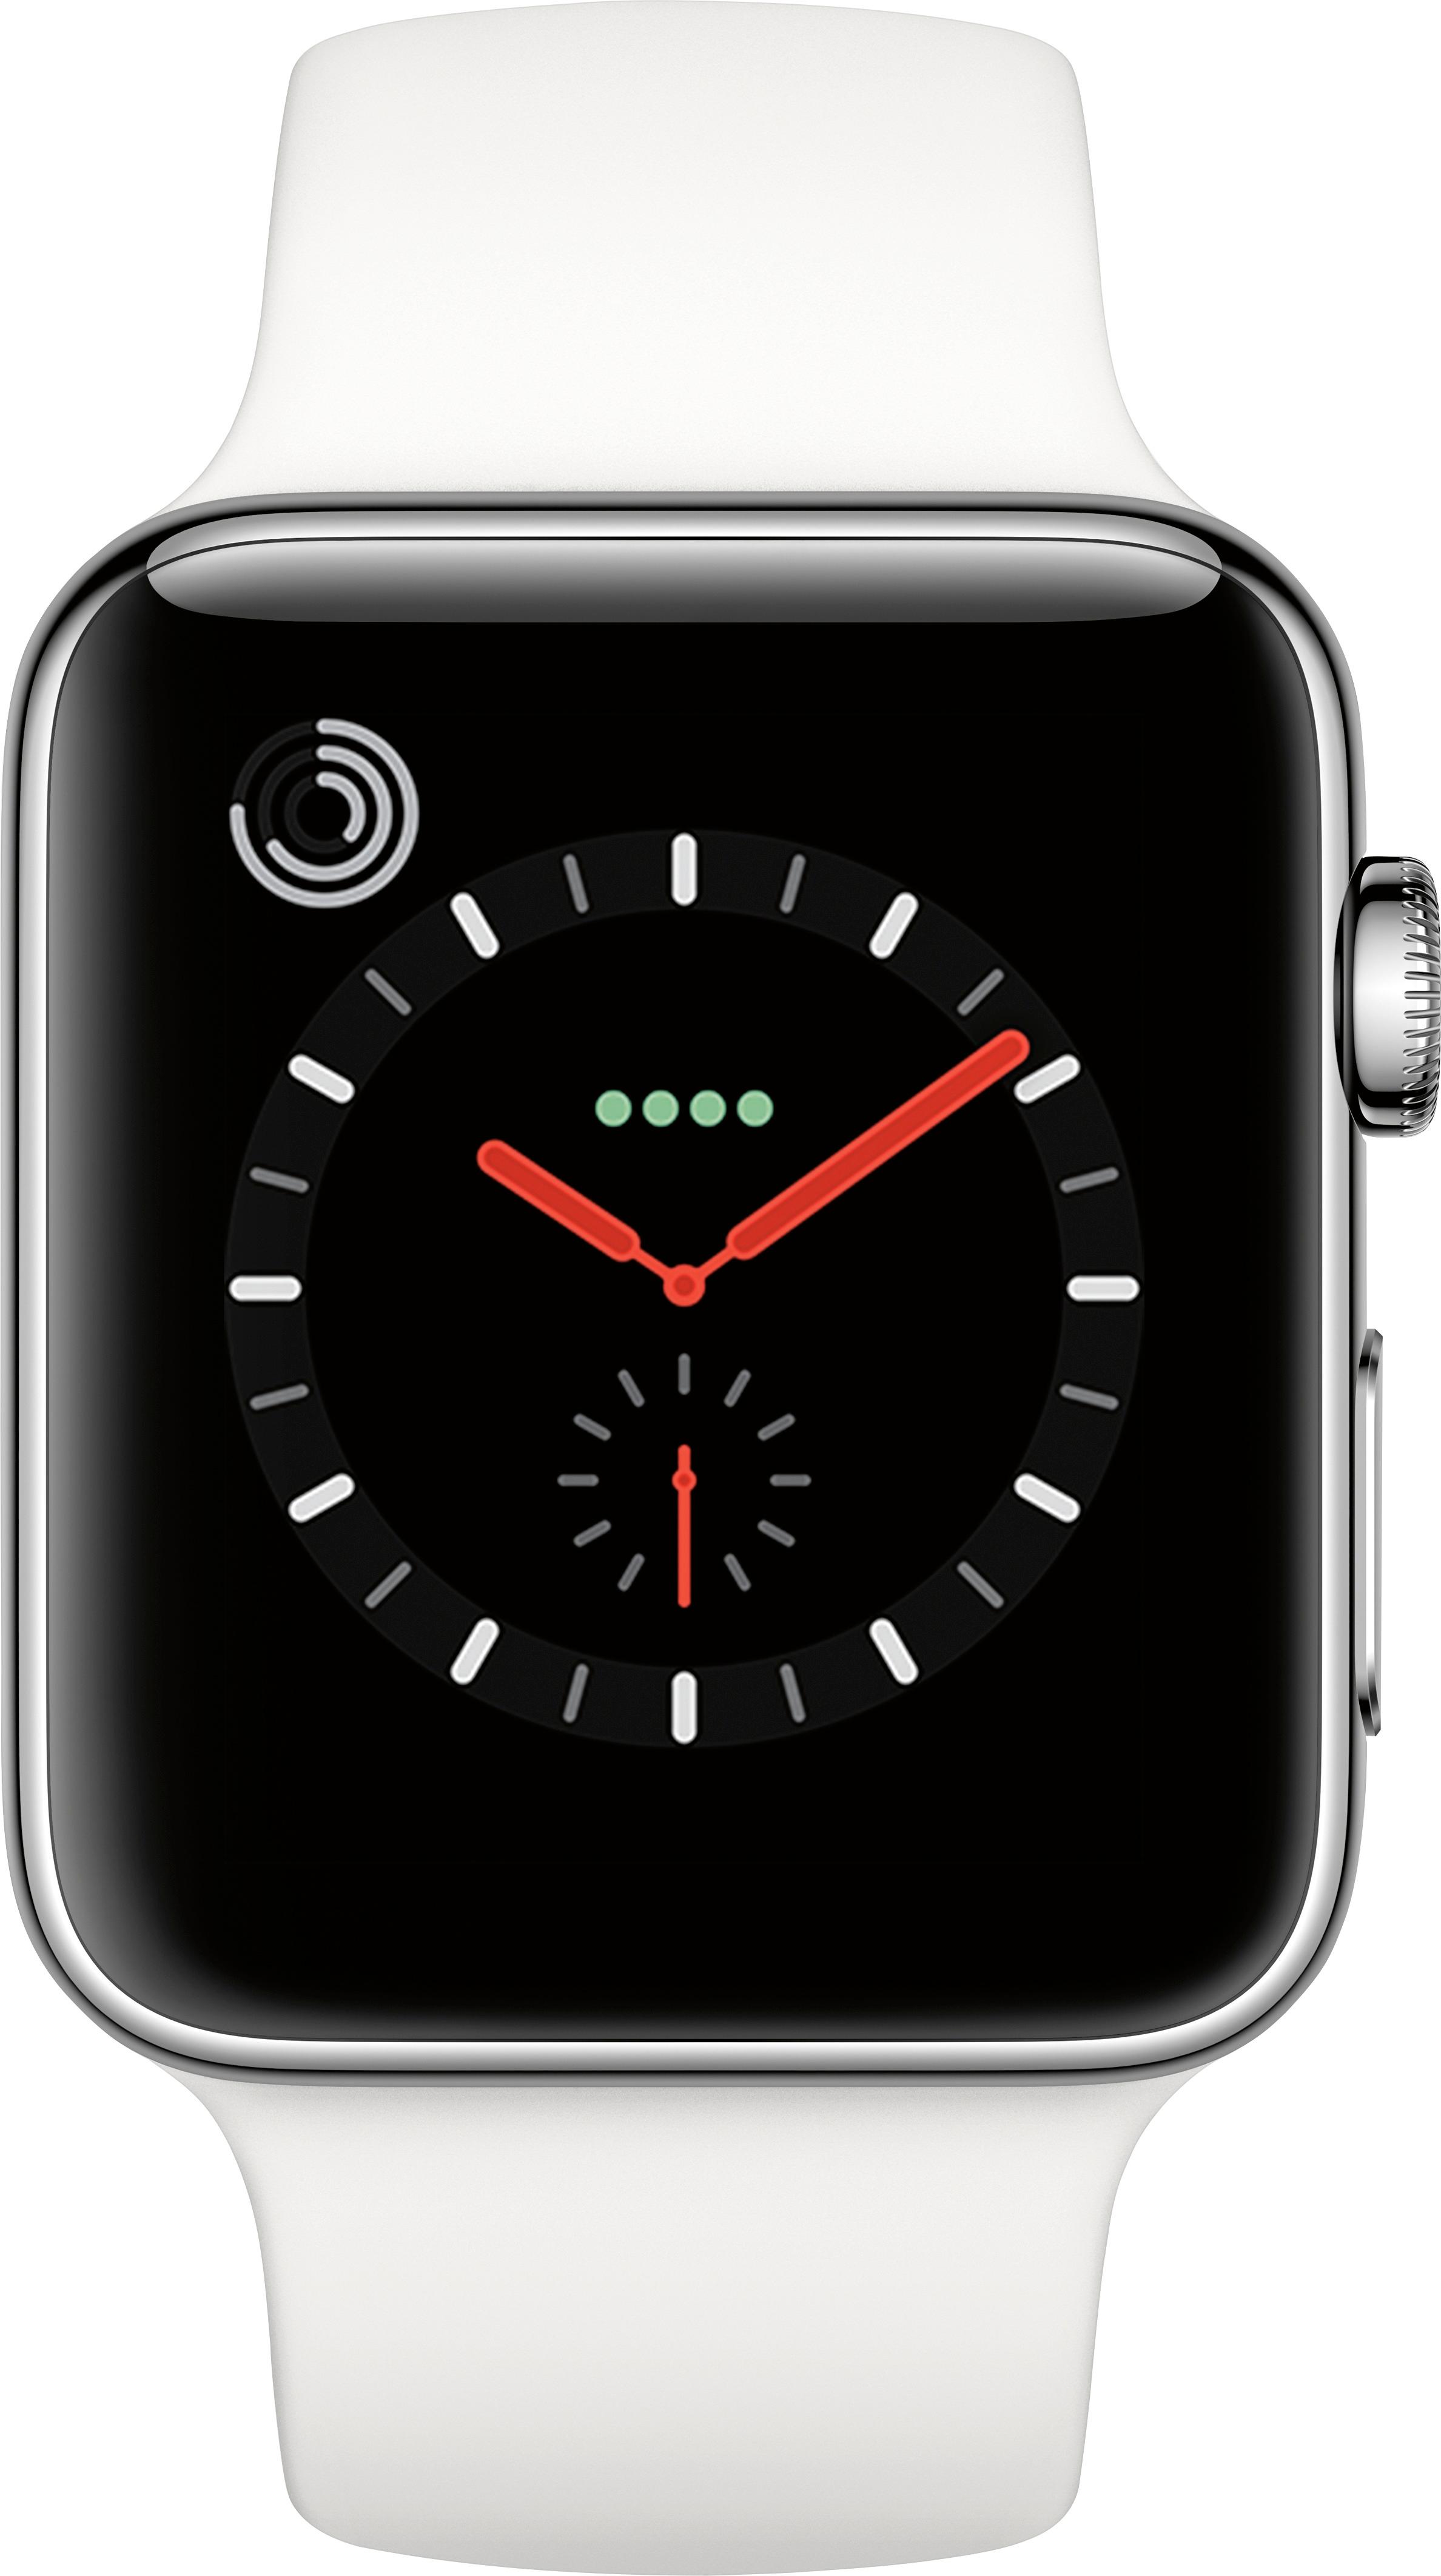 Best Buy: Apple Watch Series 3 (GPS + Cellular) 42mm Stainless